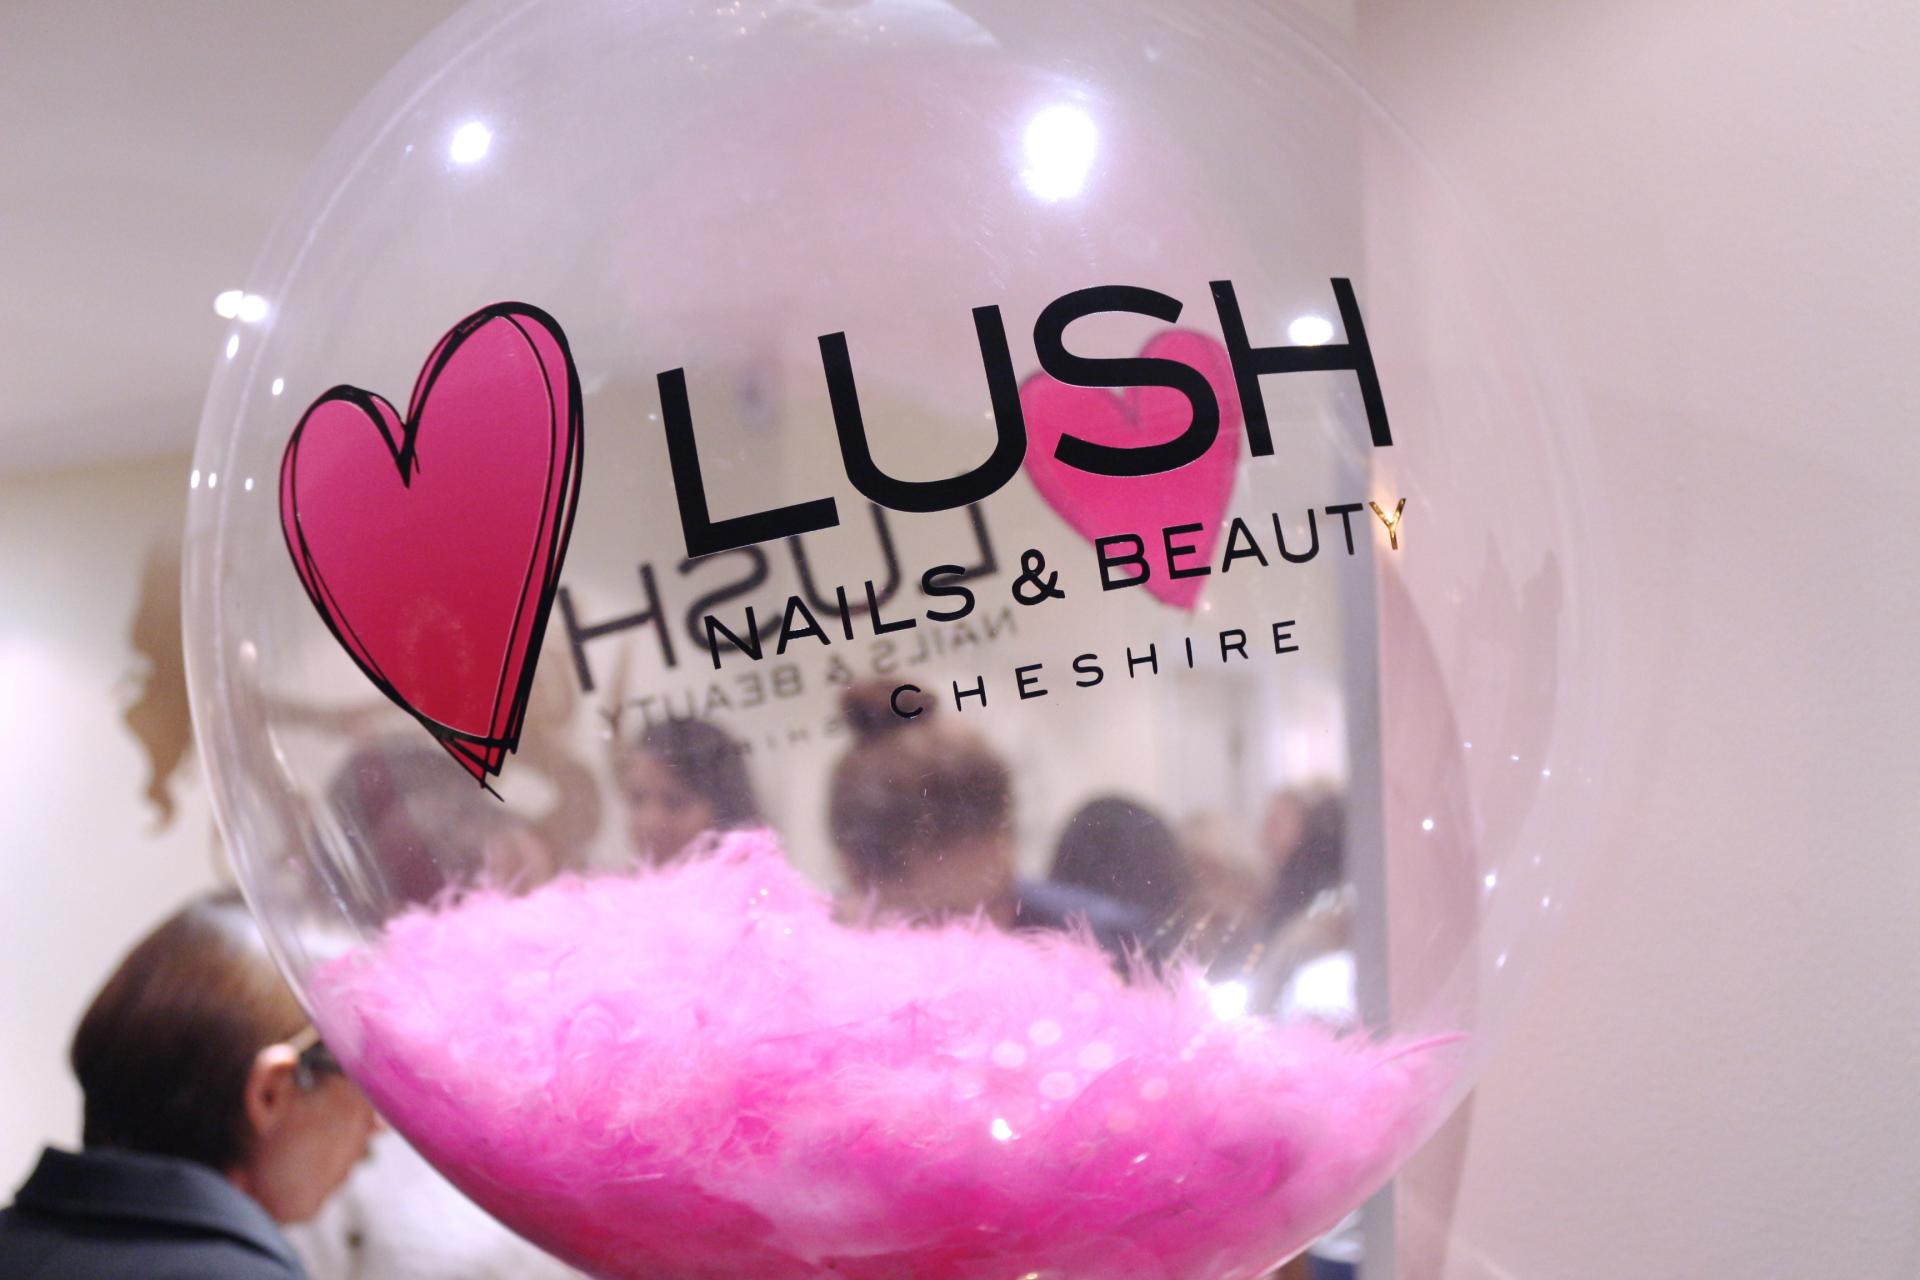 Lush Nails and Beauty Cheshire